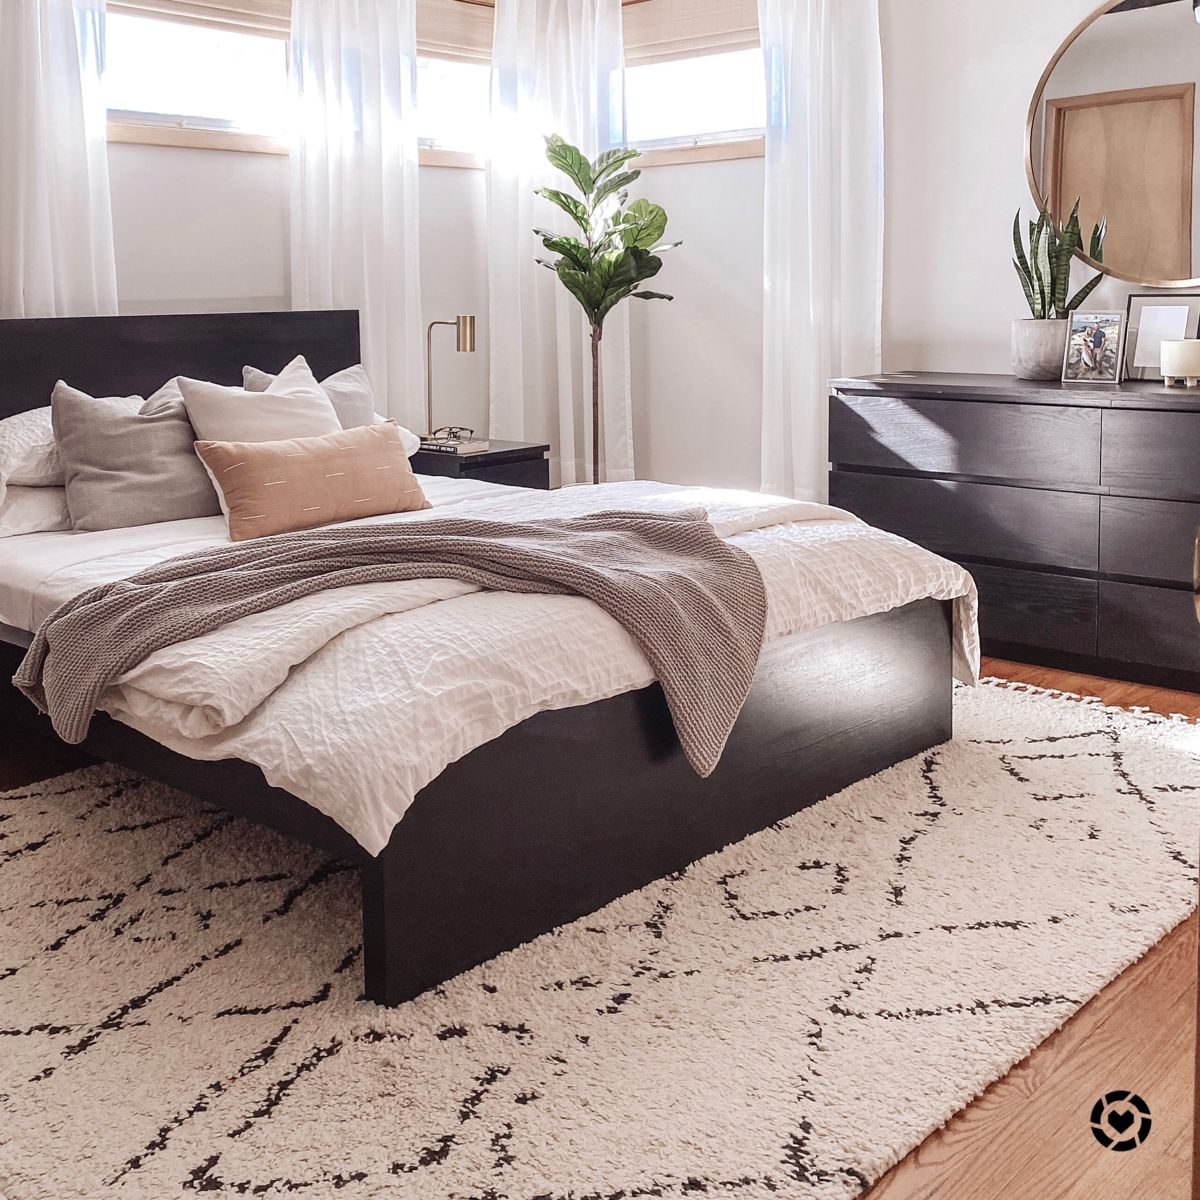 Creating a Modern Vibe with Black Bedroom
Furniture